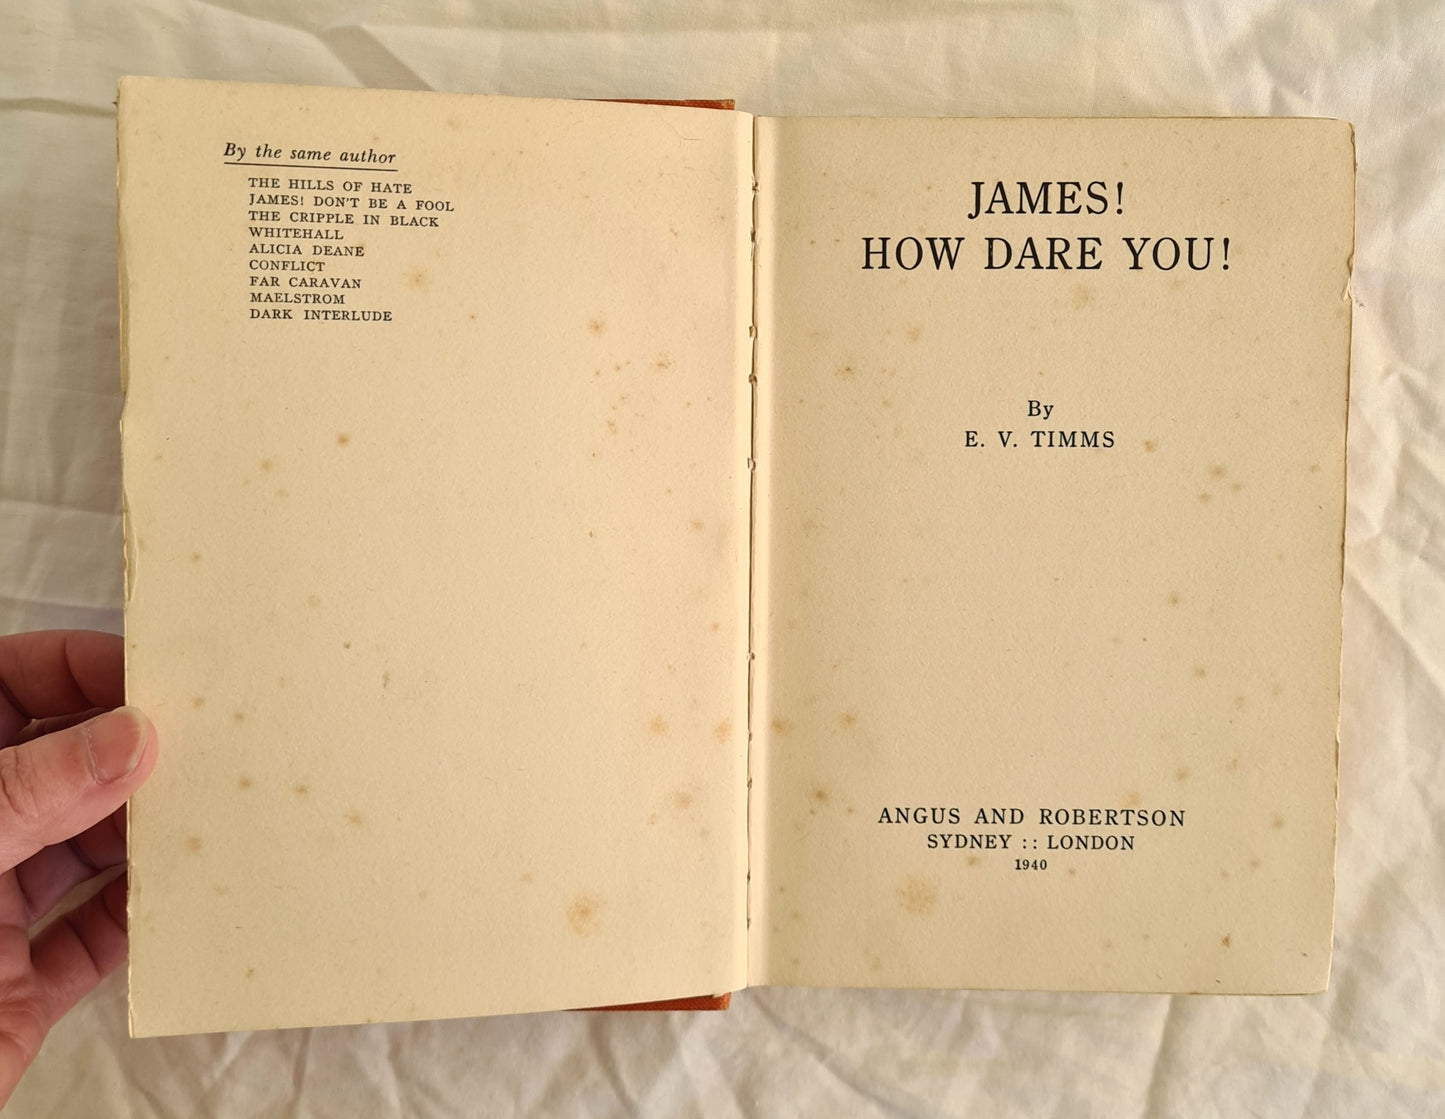 James! How Dare You! by E. V. Timms